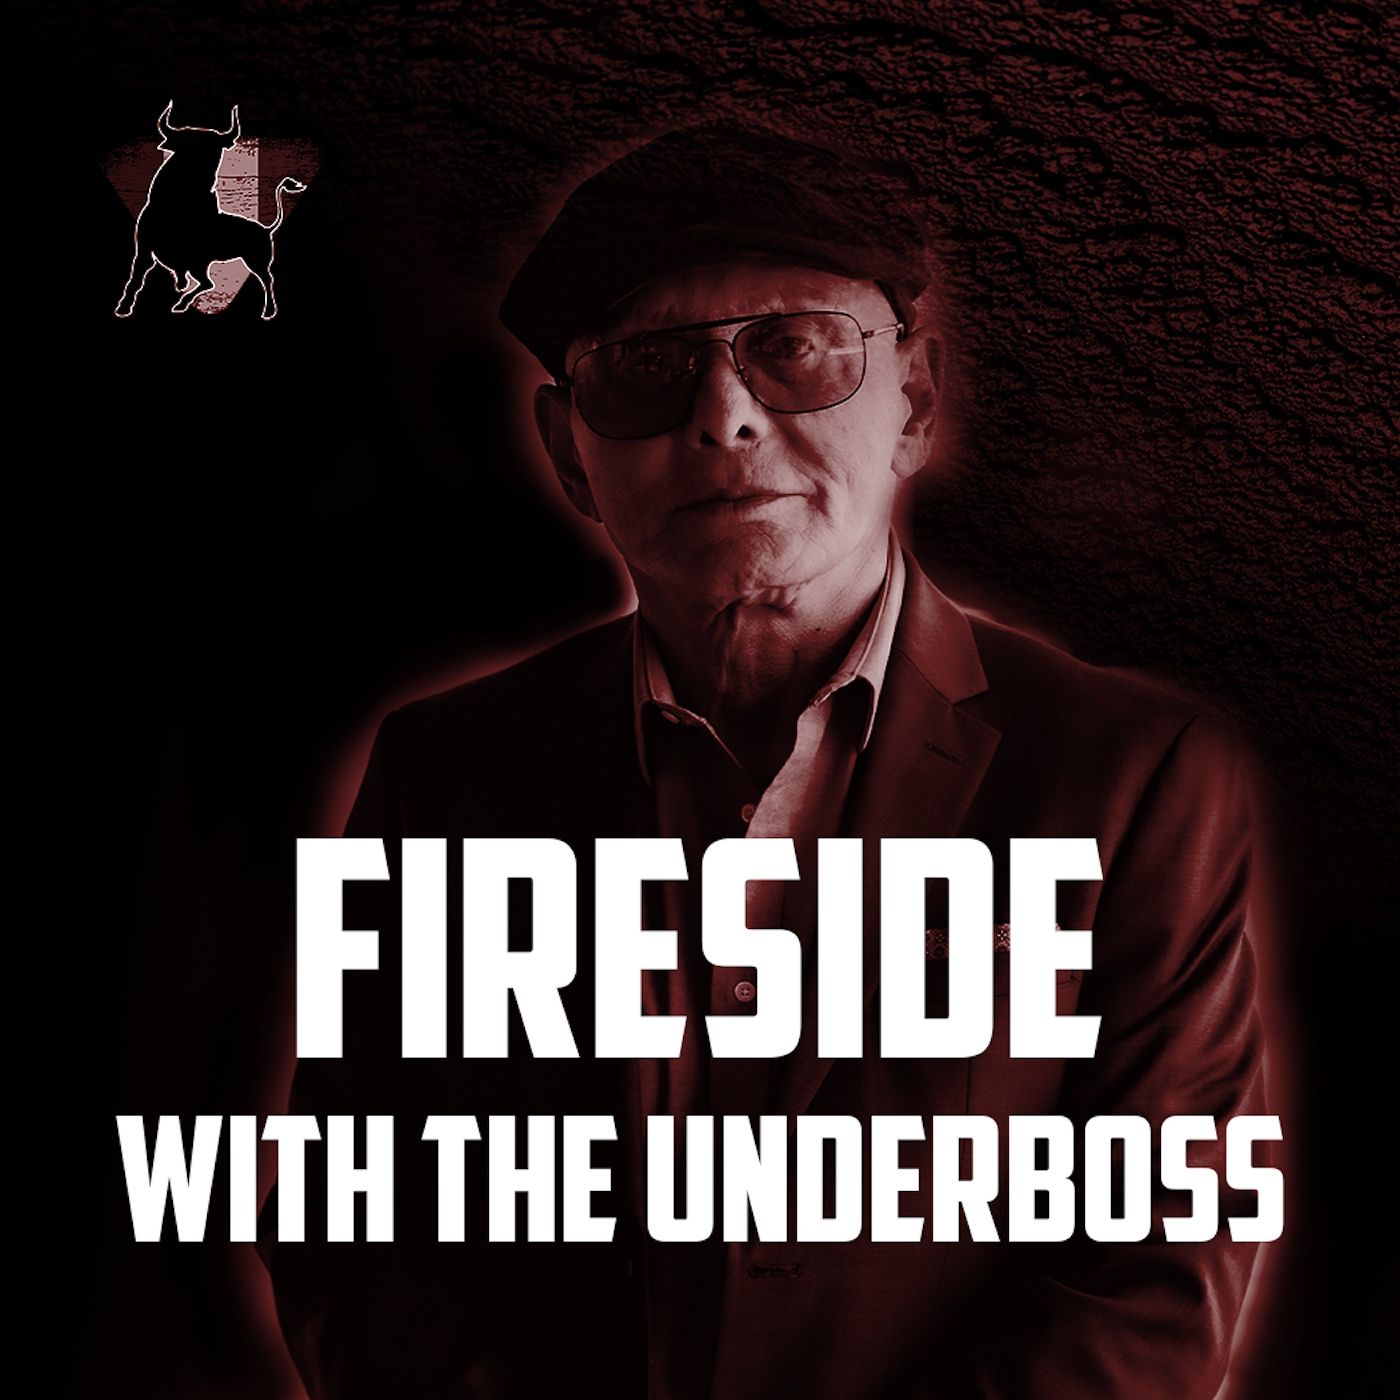 Fireside With The Underboss – ”He’s A Killer Some Of Us Will End Up In The Trunk Of A Car”